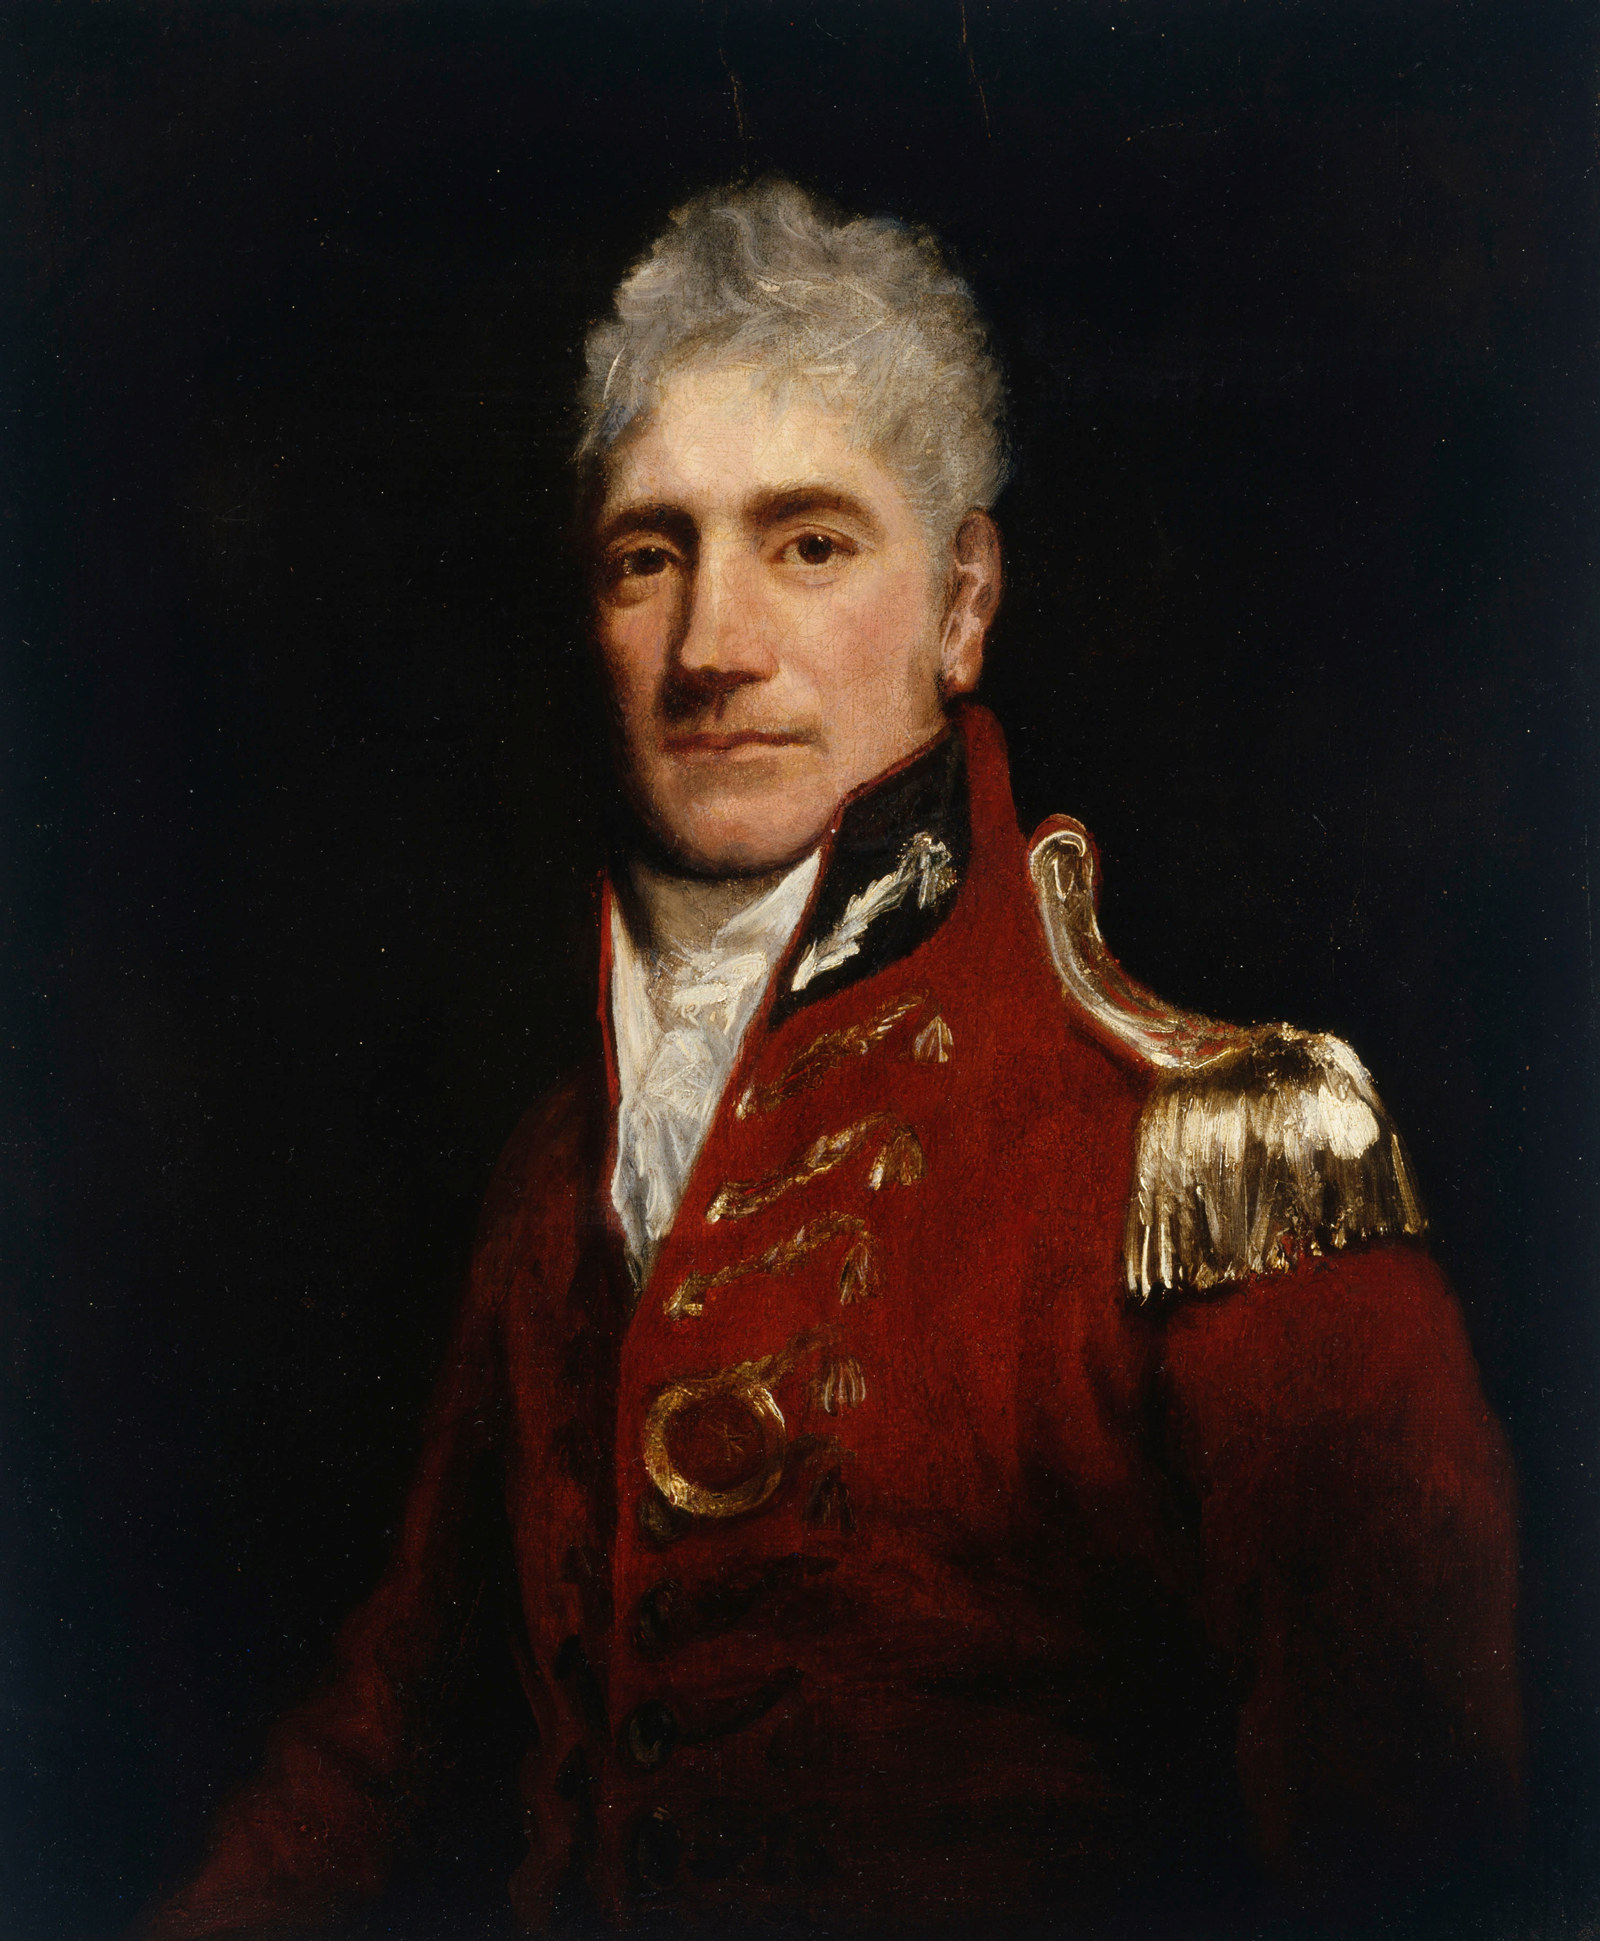 painting of grey haired man wearing military uniform with high collar and gold epillets.